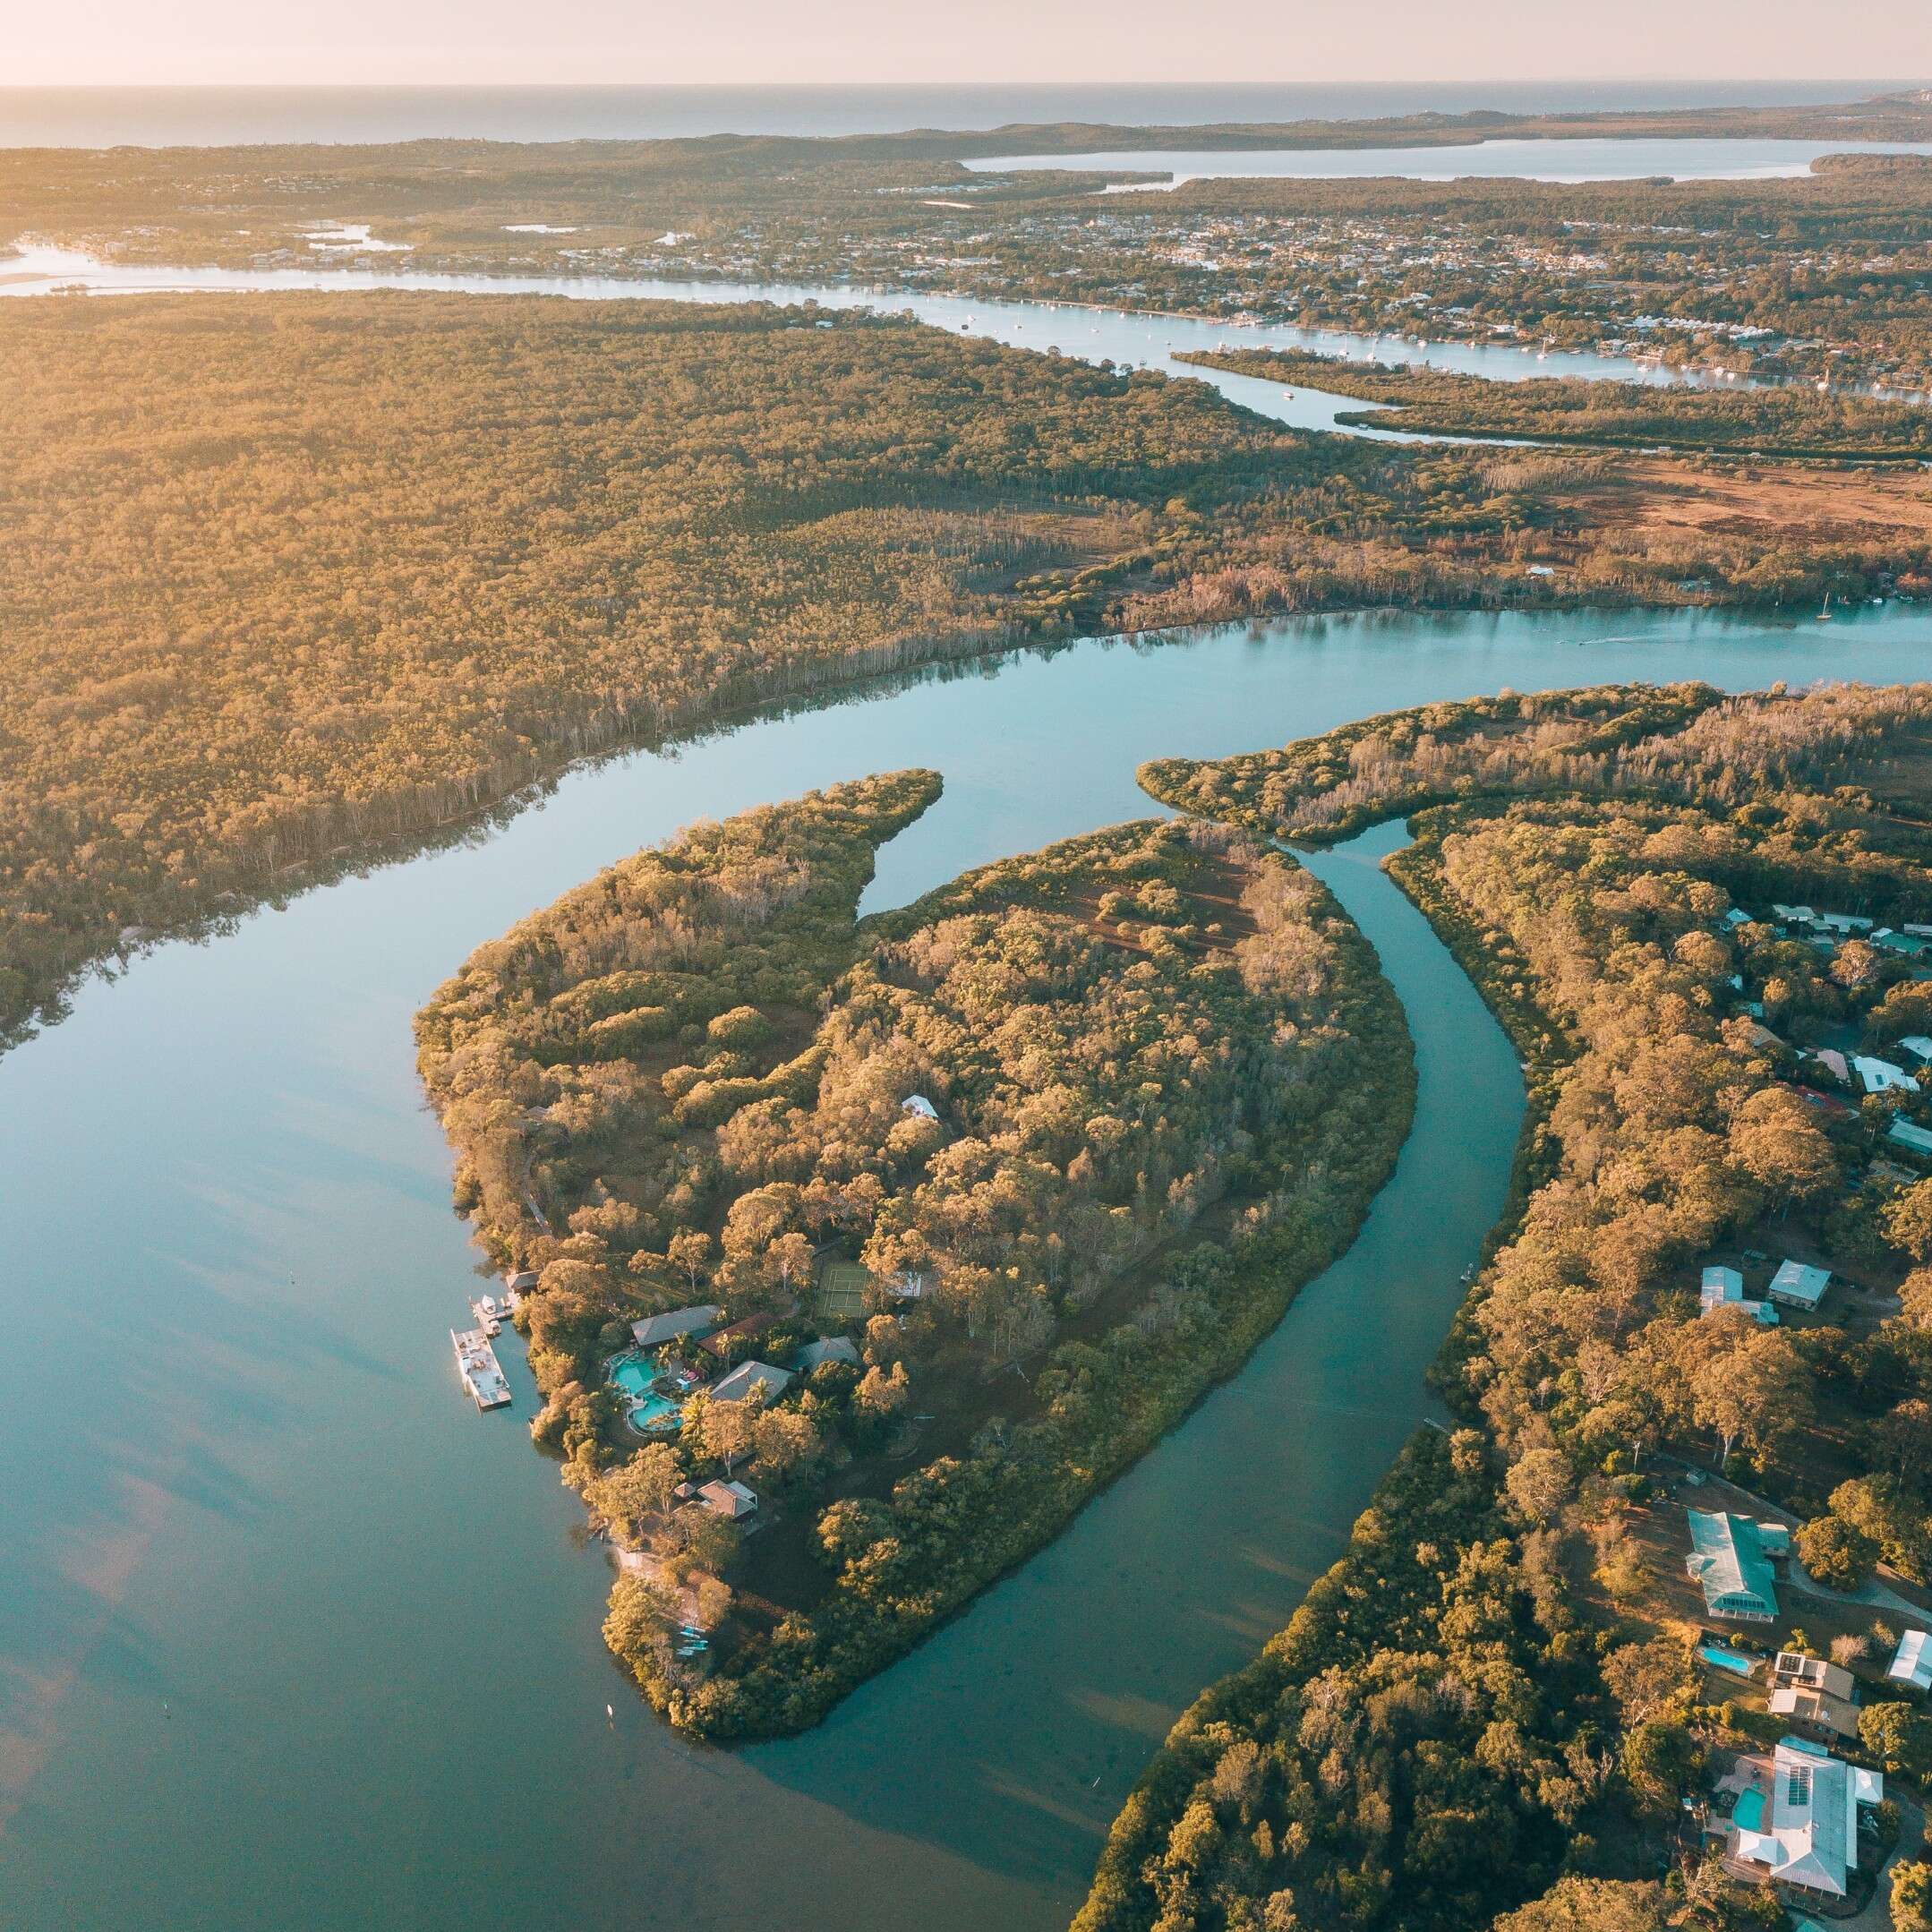 Aerial view of Makepeace Island, located in the Noosa River, Queensland © Visit Noosa